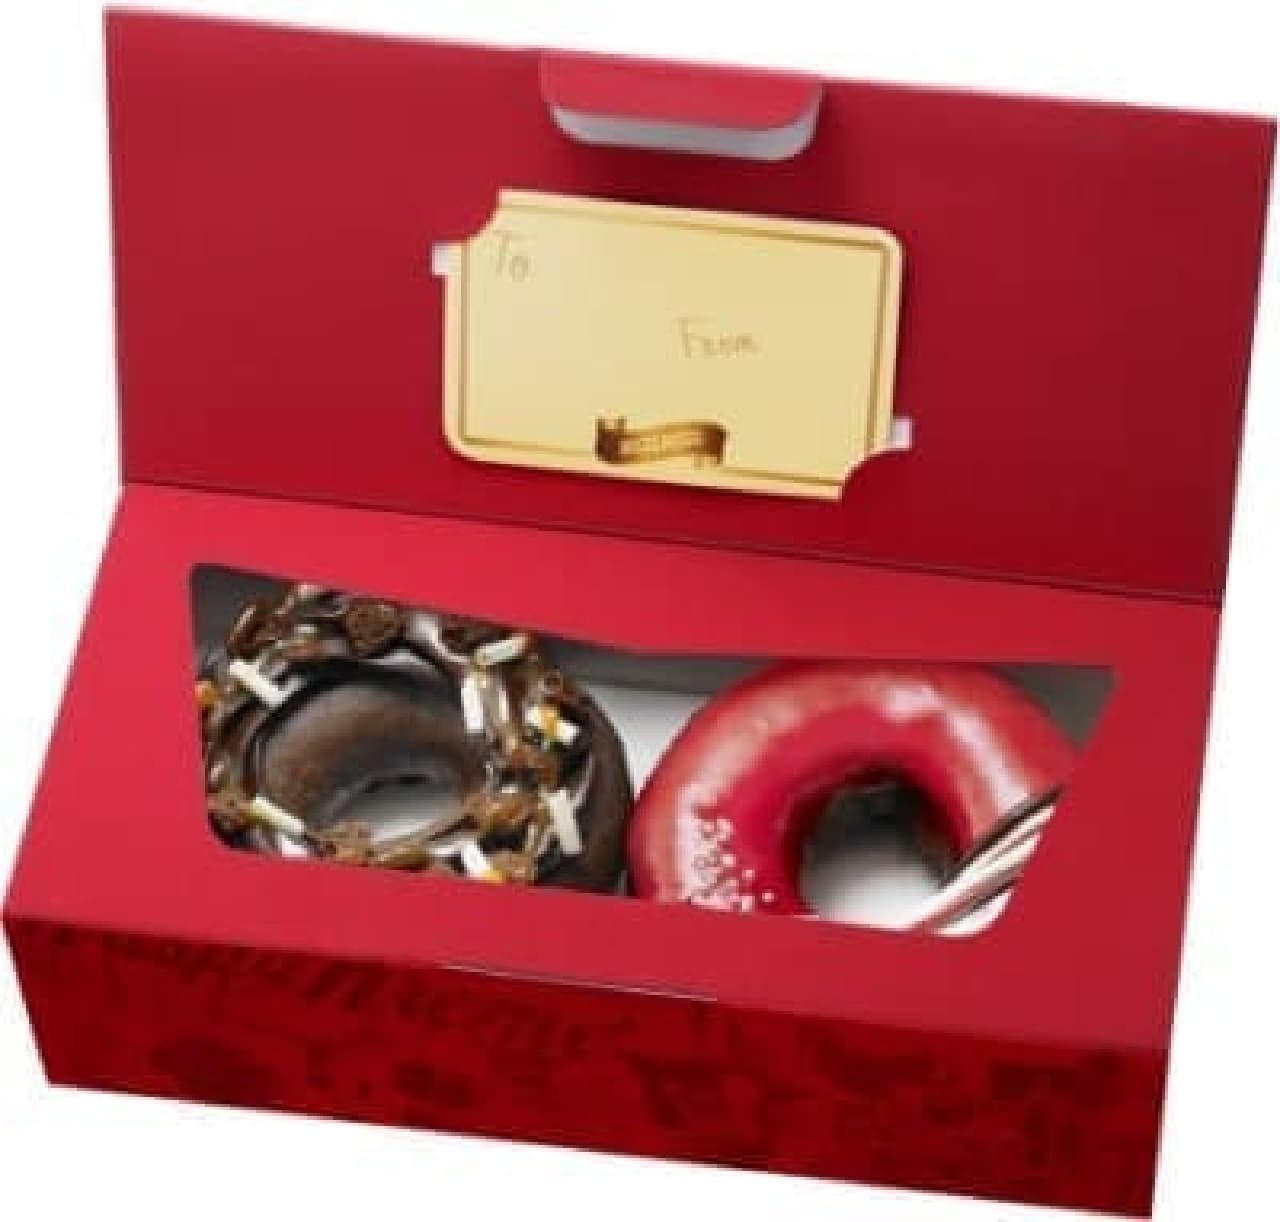 "Chocolate Rich Box" that you want to give to your favorite boyfriend